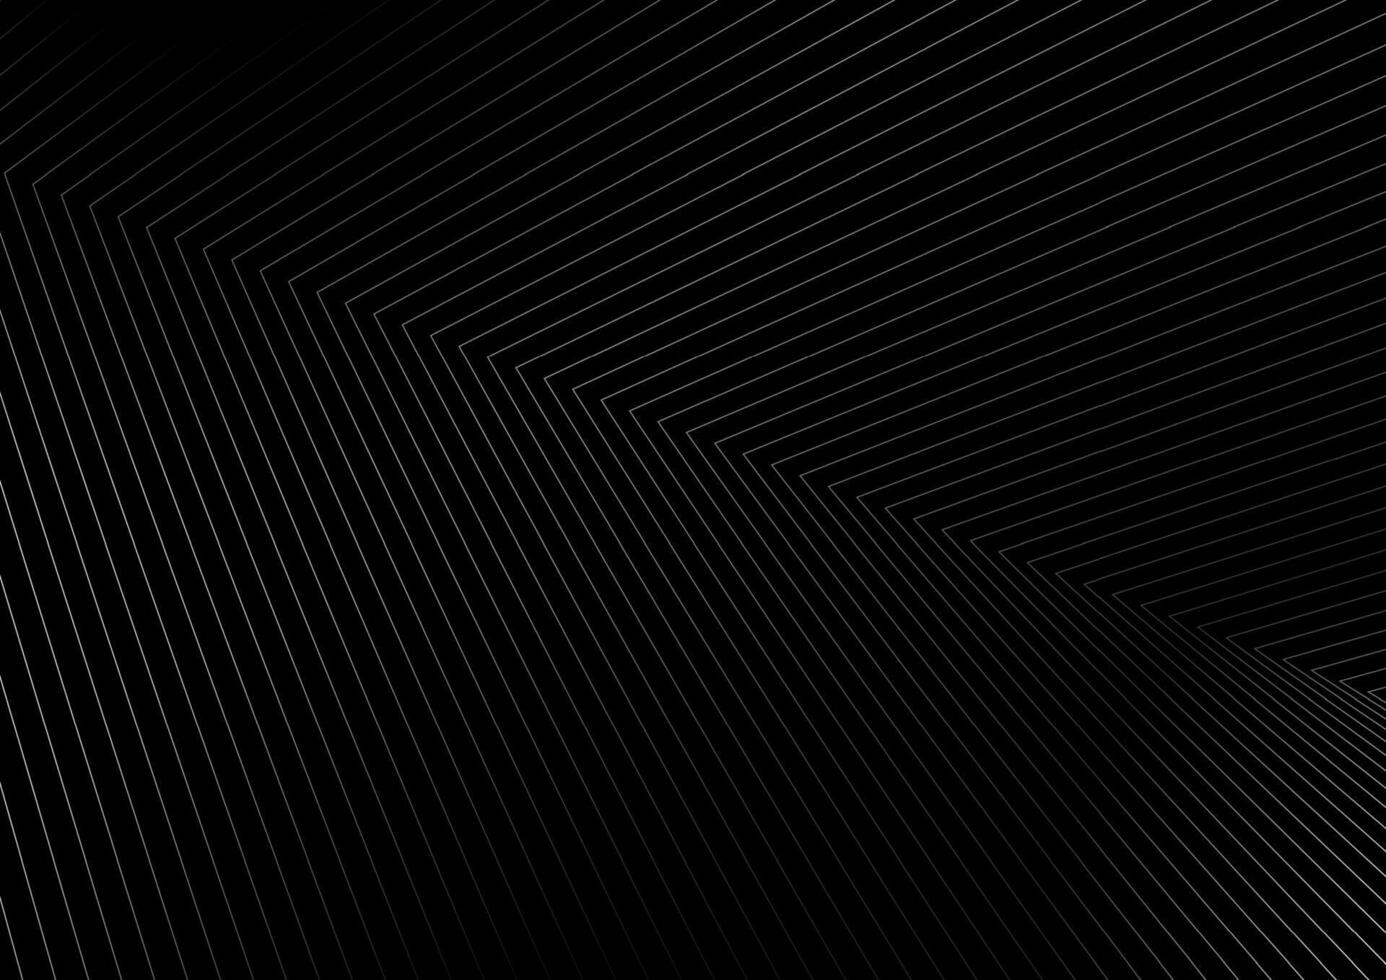 Black and white abstract minimal background with lines vector